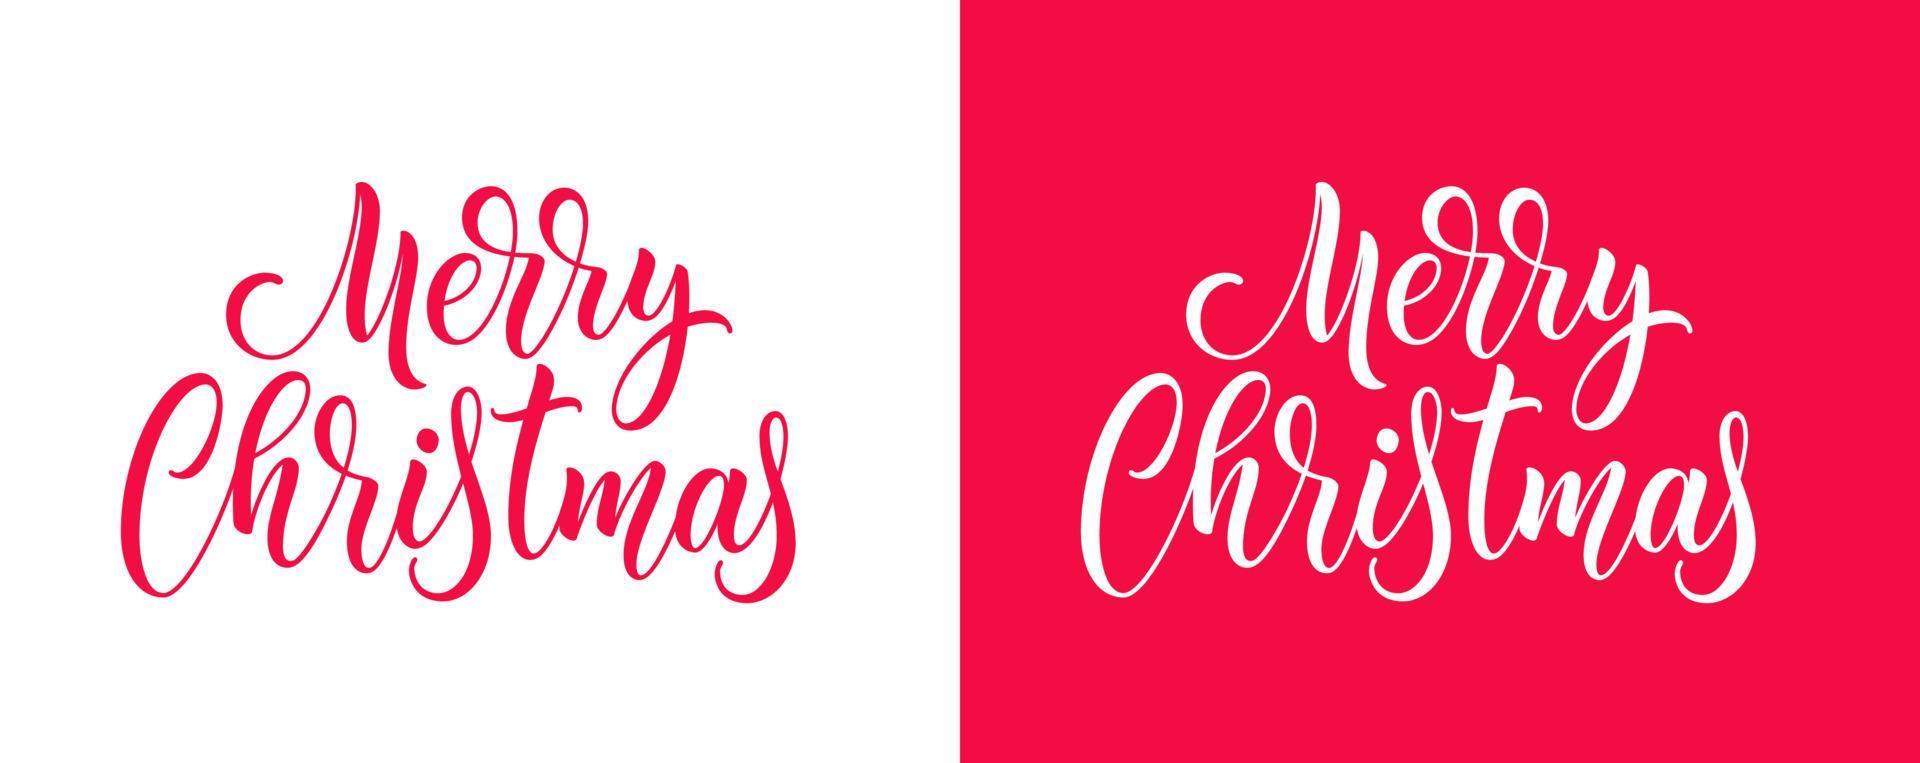 Christmas hand drawn lettering. Xmas calligraphy on white and red background. Merry Christmas handwritten calligraphic text. vector